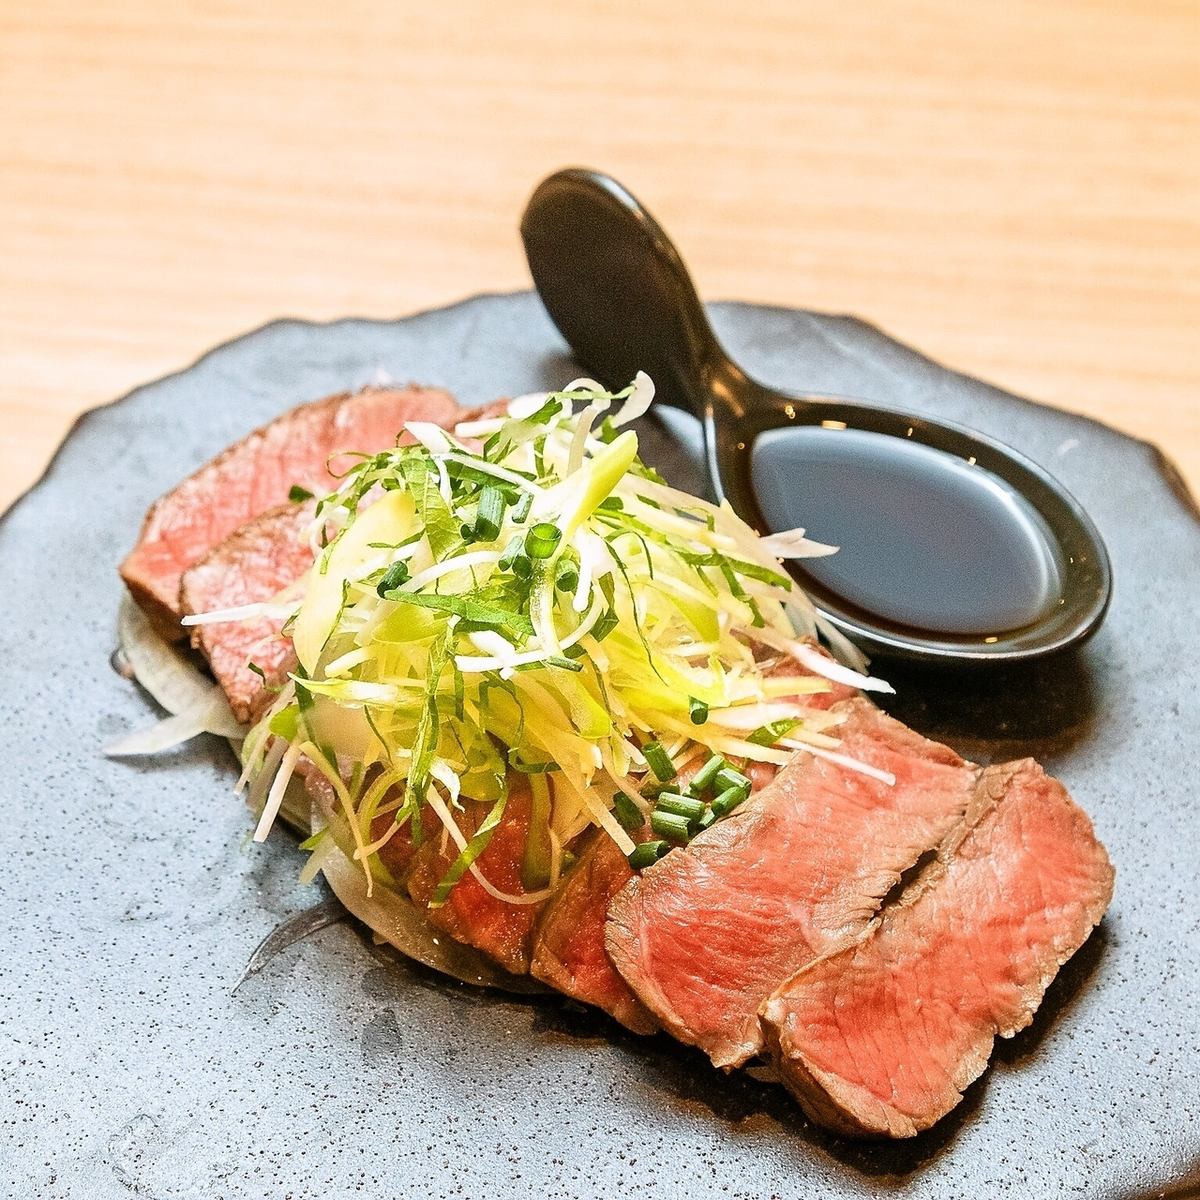 Many recommended menu items such as ``Beef Tataki with plenty of seasonings''!